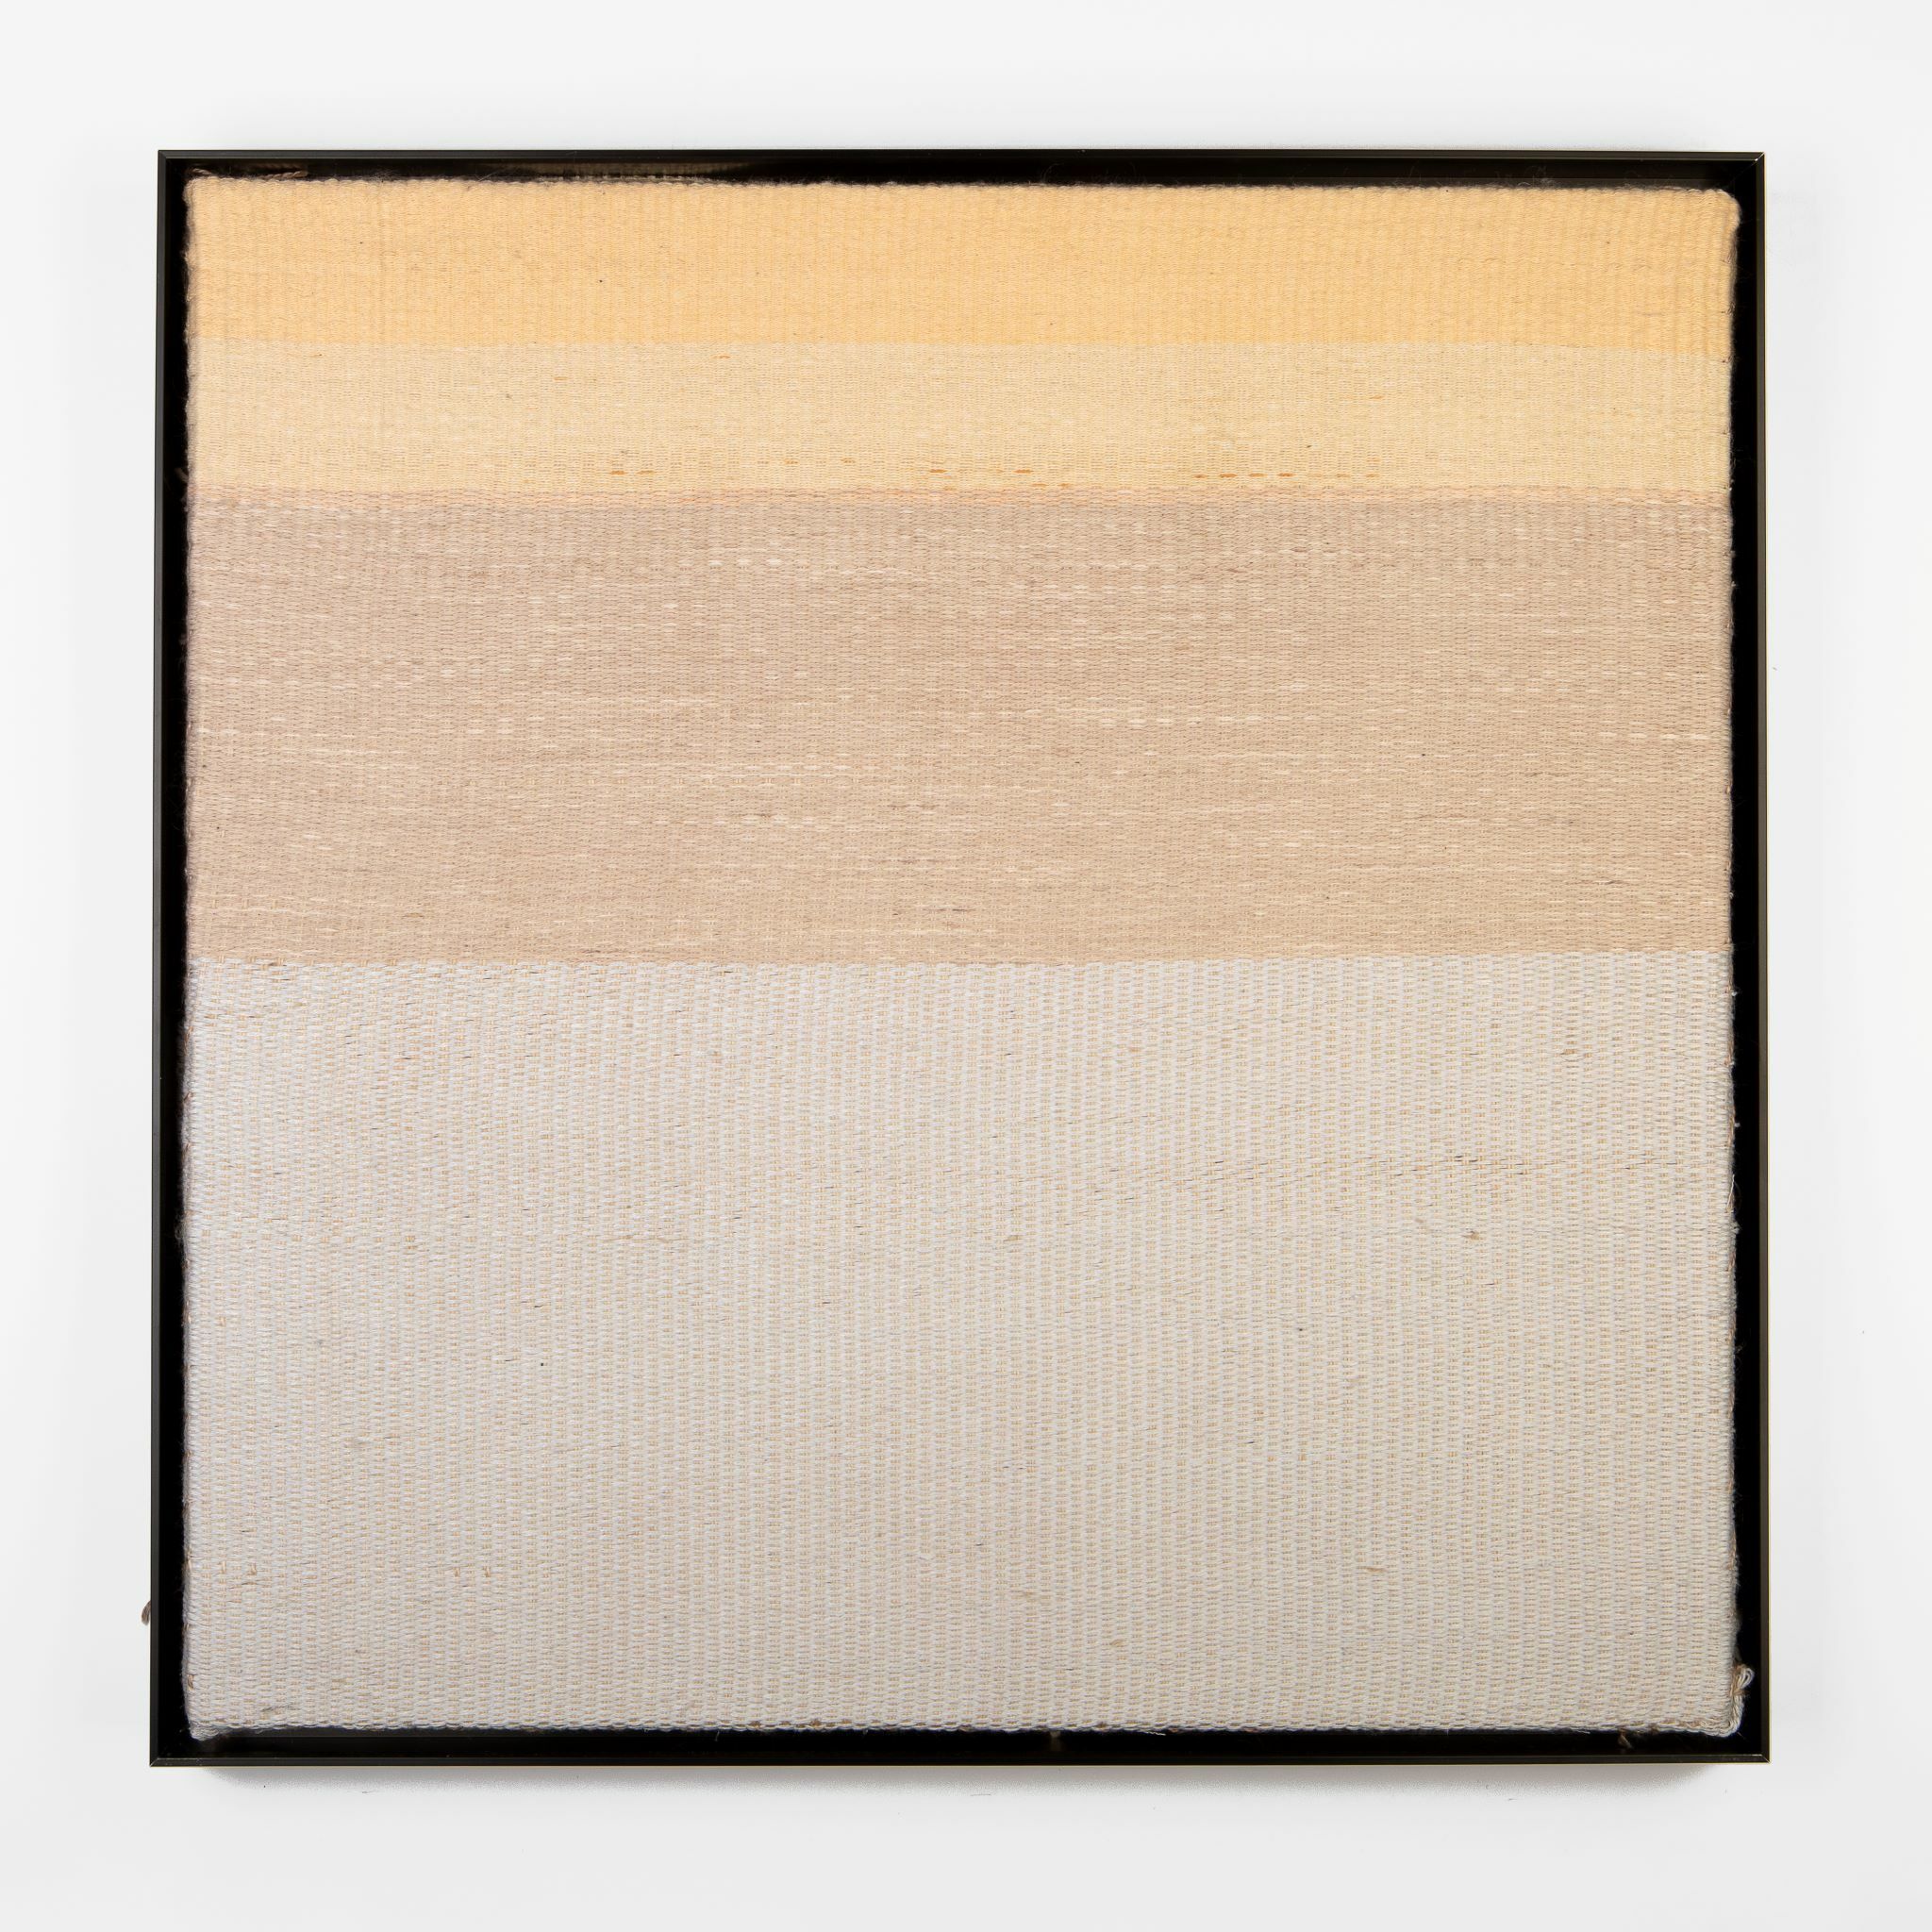 

											Will Clift and Elizabeth Hohimer</b>

											<em>
												Desert Variations</em> 

											<h4>
												Santa Fe: May 28 - August 20, 2022											</h4>

		                																																													<i>Andante Music,</i>  
																																								2022, 
																																								Texas Cotton and Clay, 
																																								21 x 21 x 2 inches 
																								
		                				